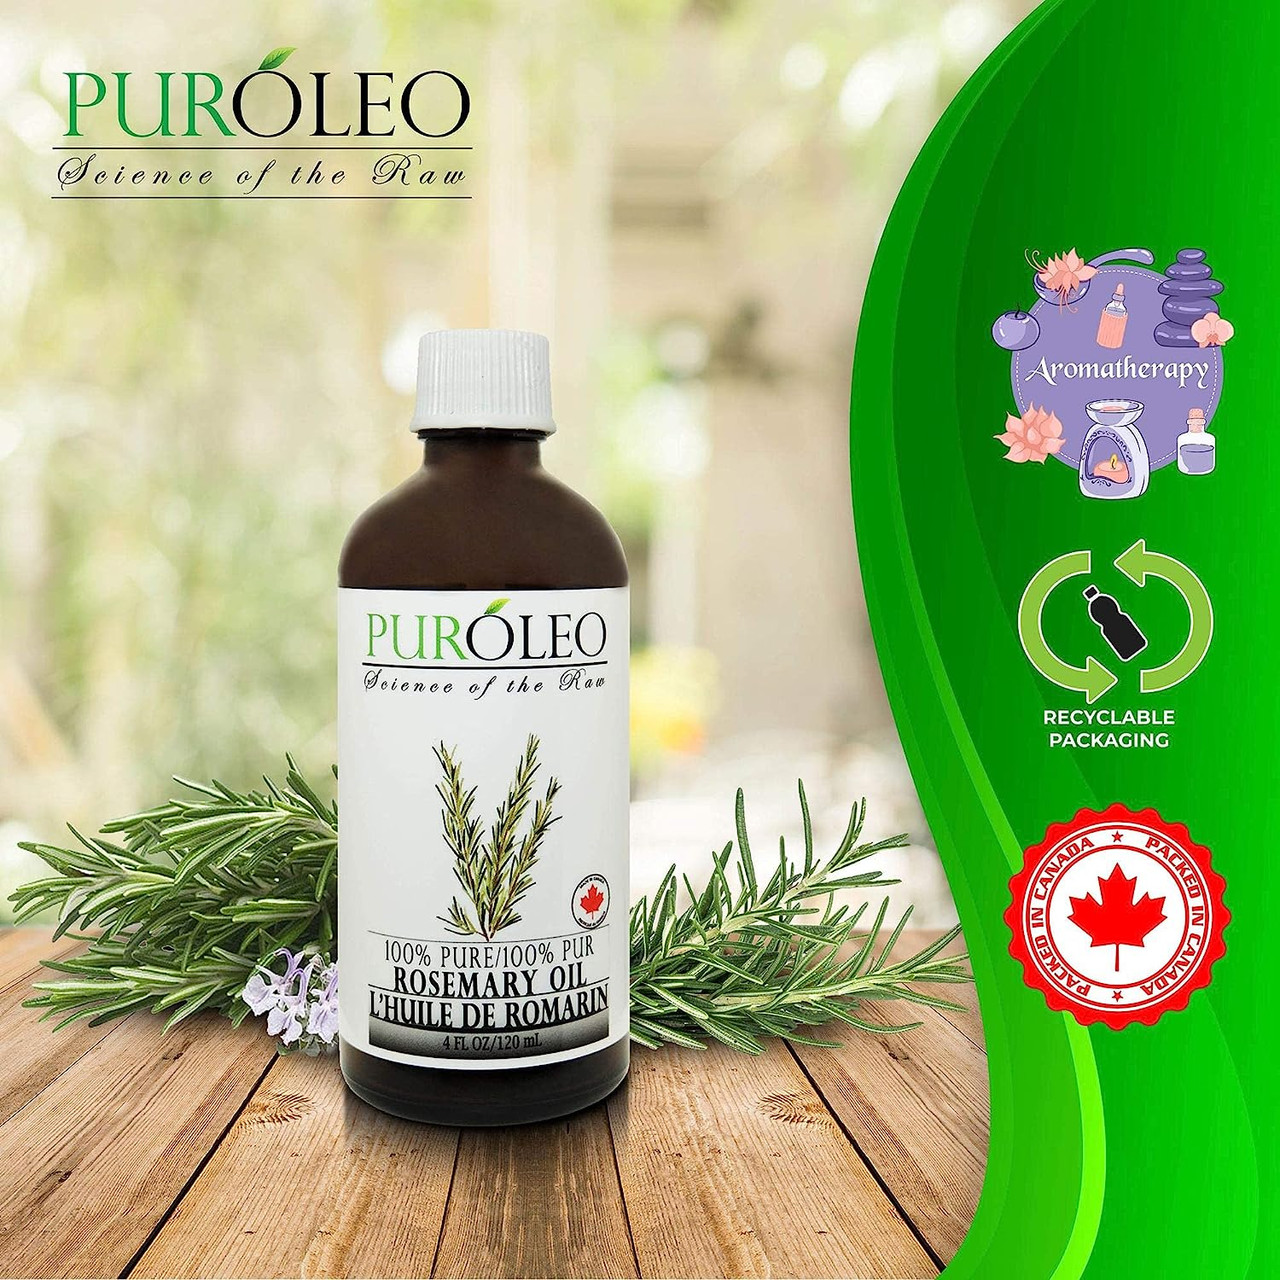 Puroleo Rosemary Essential Oil large Bottle 100% Pure Natural